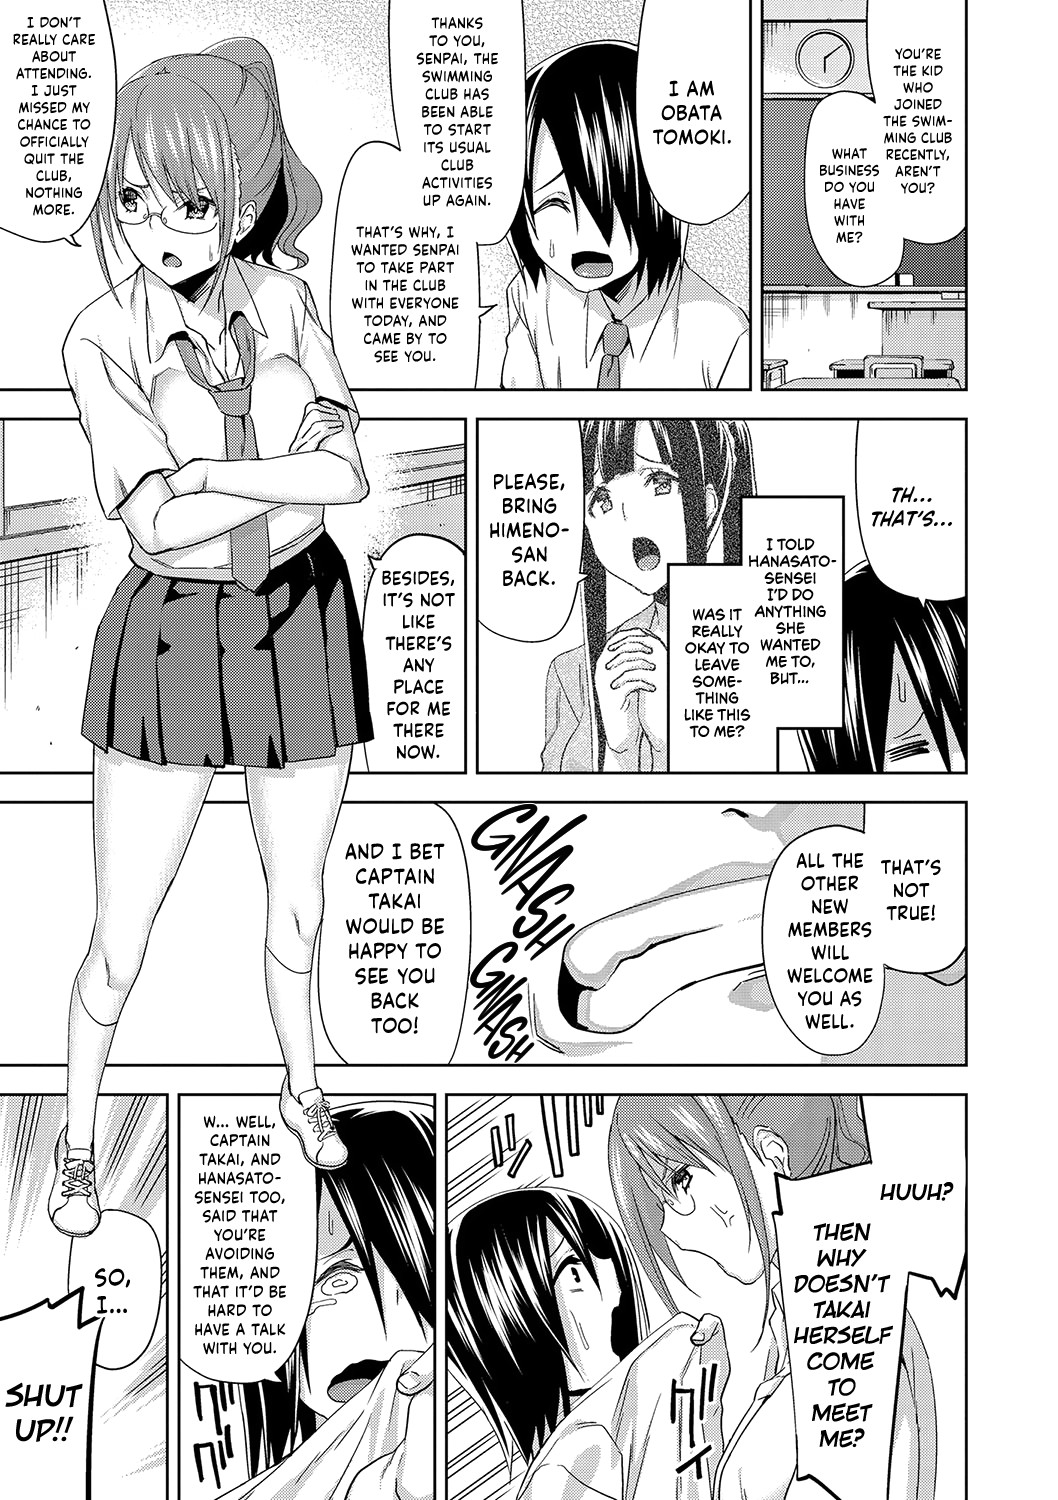 Hentai Manga Comic-Girls From Point Of View-Chapter 10-3